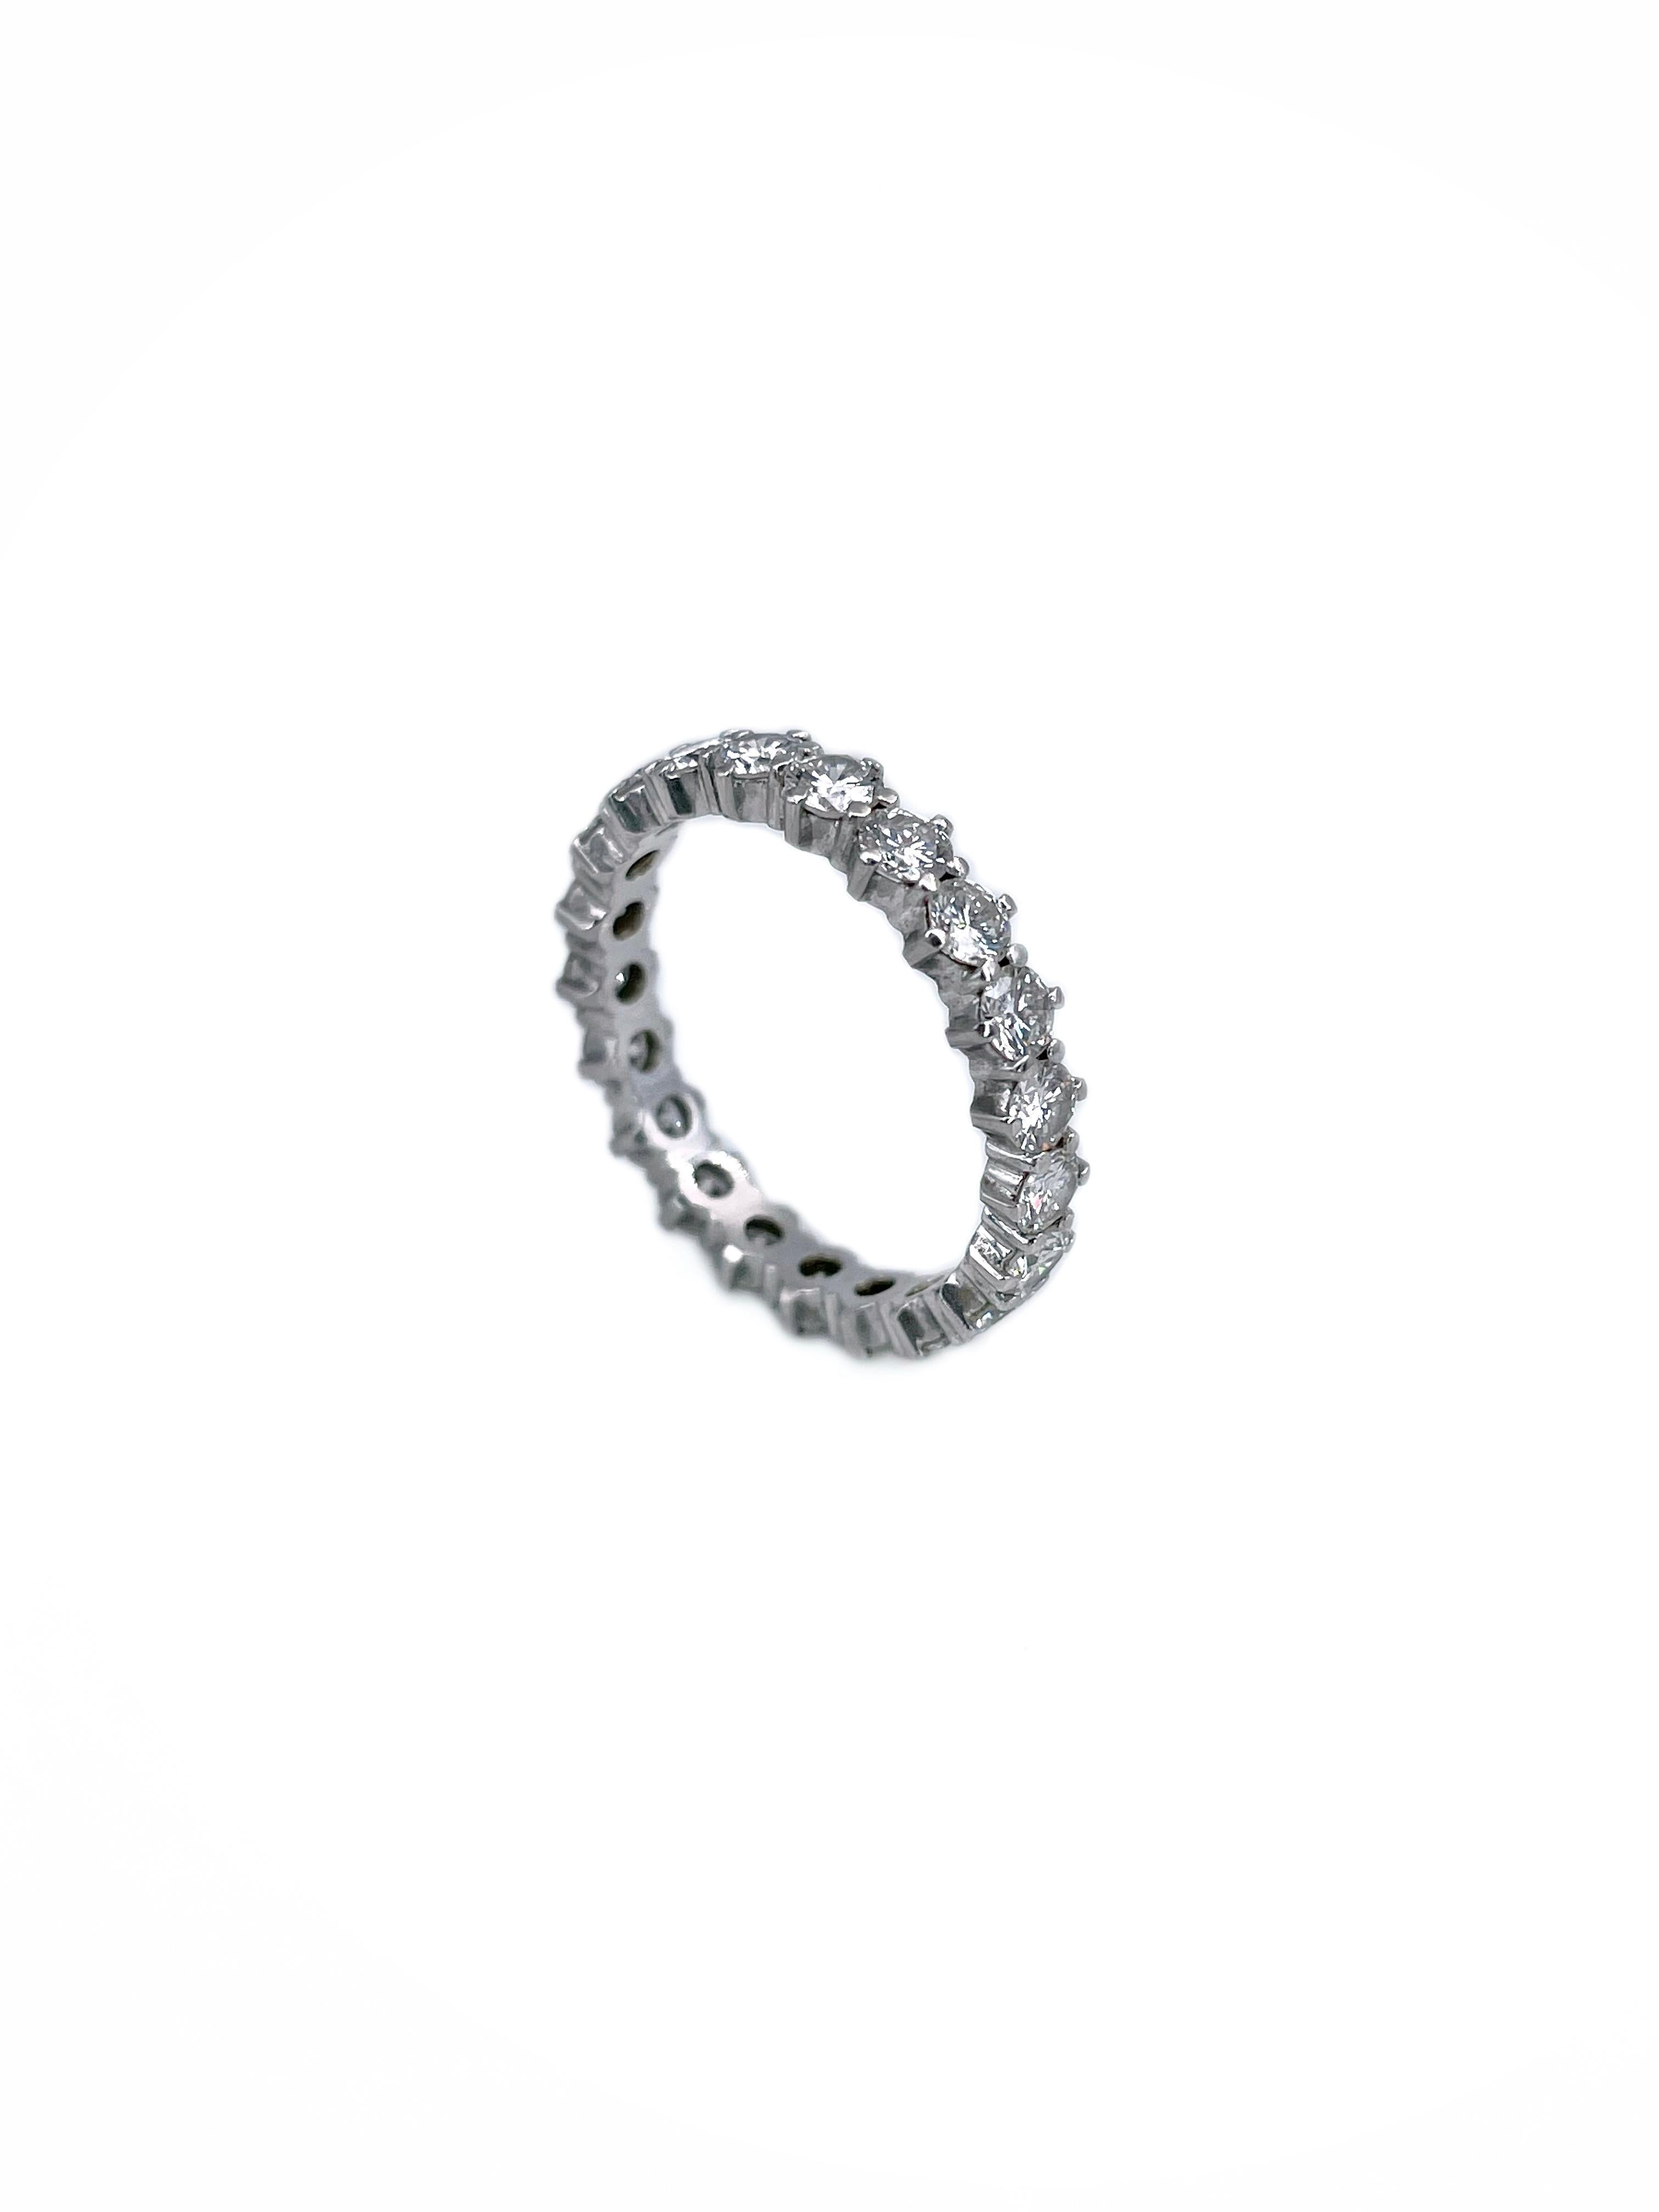 This is a vintage eternity ring crafted in 900 hallmark platinum. Circa 1970. 

The piece features 21 round brilliant cut diamonds: TW 2.00ct, RW-W, VVS-VS. 

Weight: 3.50g  
Size: 16.75 (US 6.25)

IMPORTANT: cannot be resized

———

If you have any